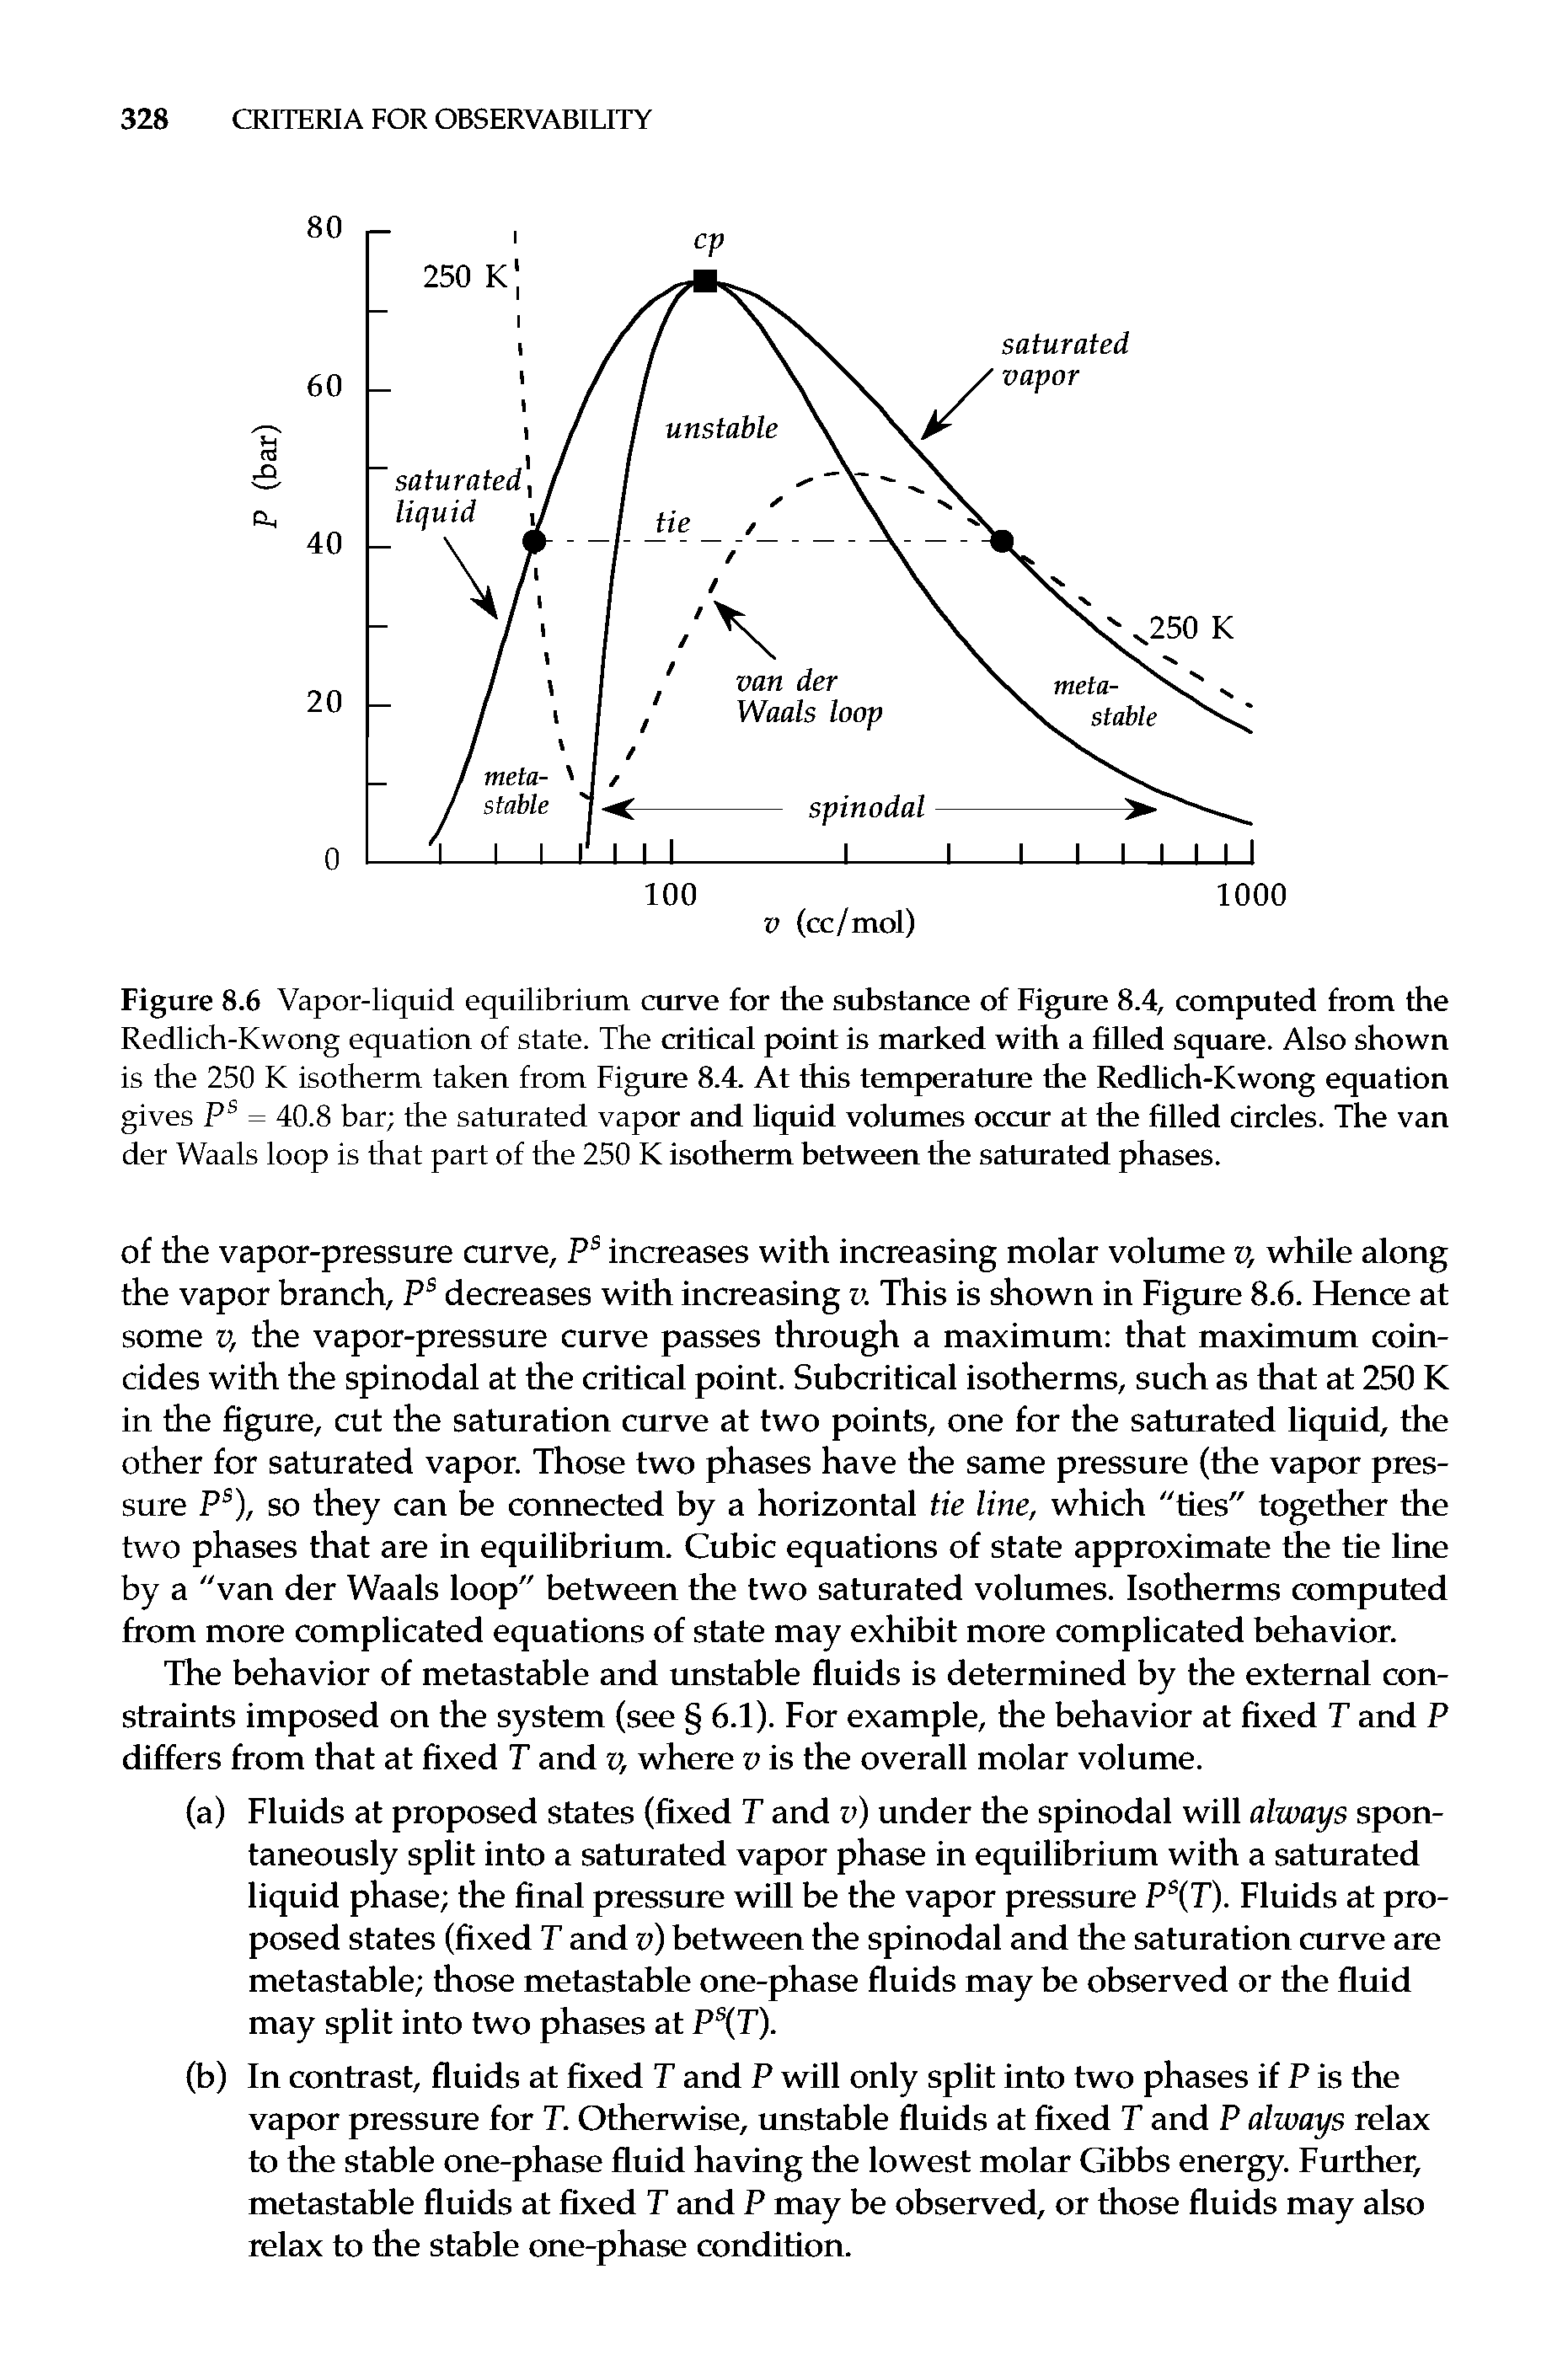 Figure 8.6 Vapor-liquid equilibrium curve for the substance of Figure 8.4, computed from the Redlich-Kwong equation of state. The critical point is marked with a filled square. Also shown is the 250 K isotherm taken from Figure 8.4. At this temp>erature the Redlich-Kwong equation gives P = 40.8 bar the saturated vapor and liquid volumes occur at the filled circles. The van der Waals loop is that part of the 250 K isotherm between the saturated phases.